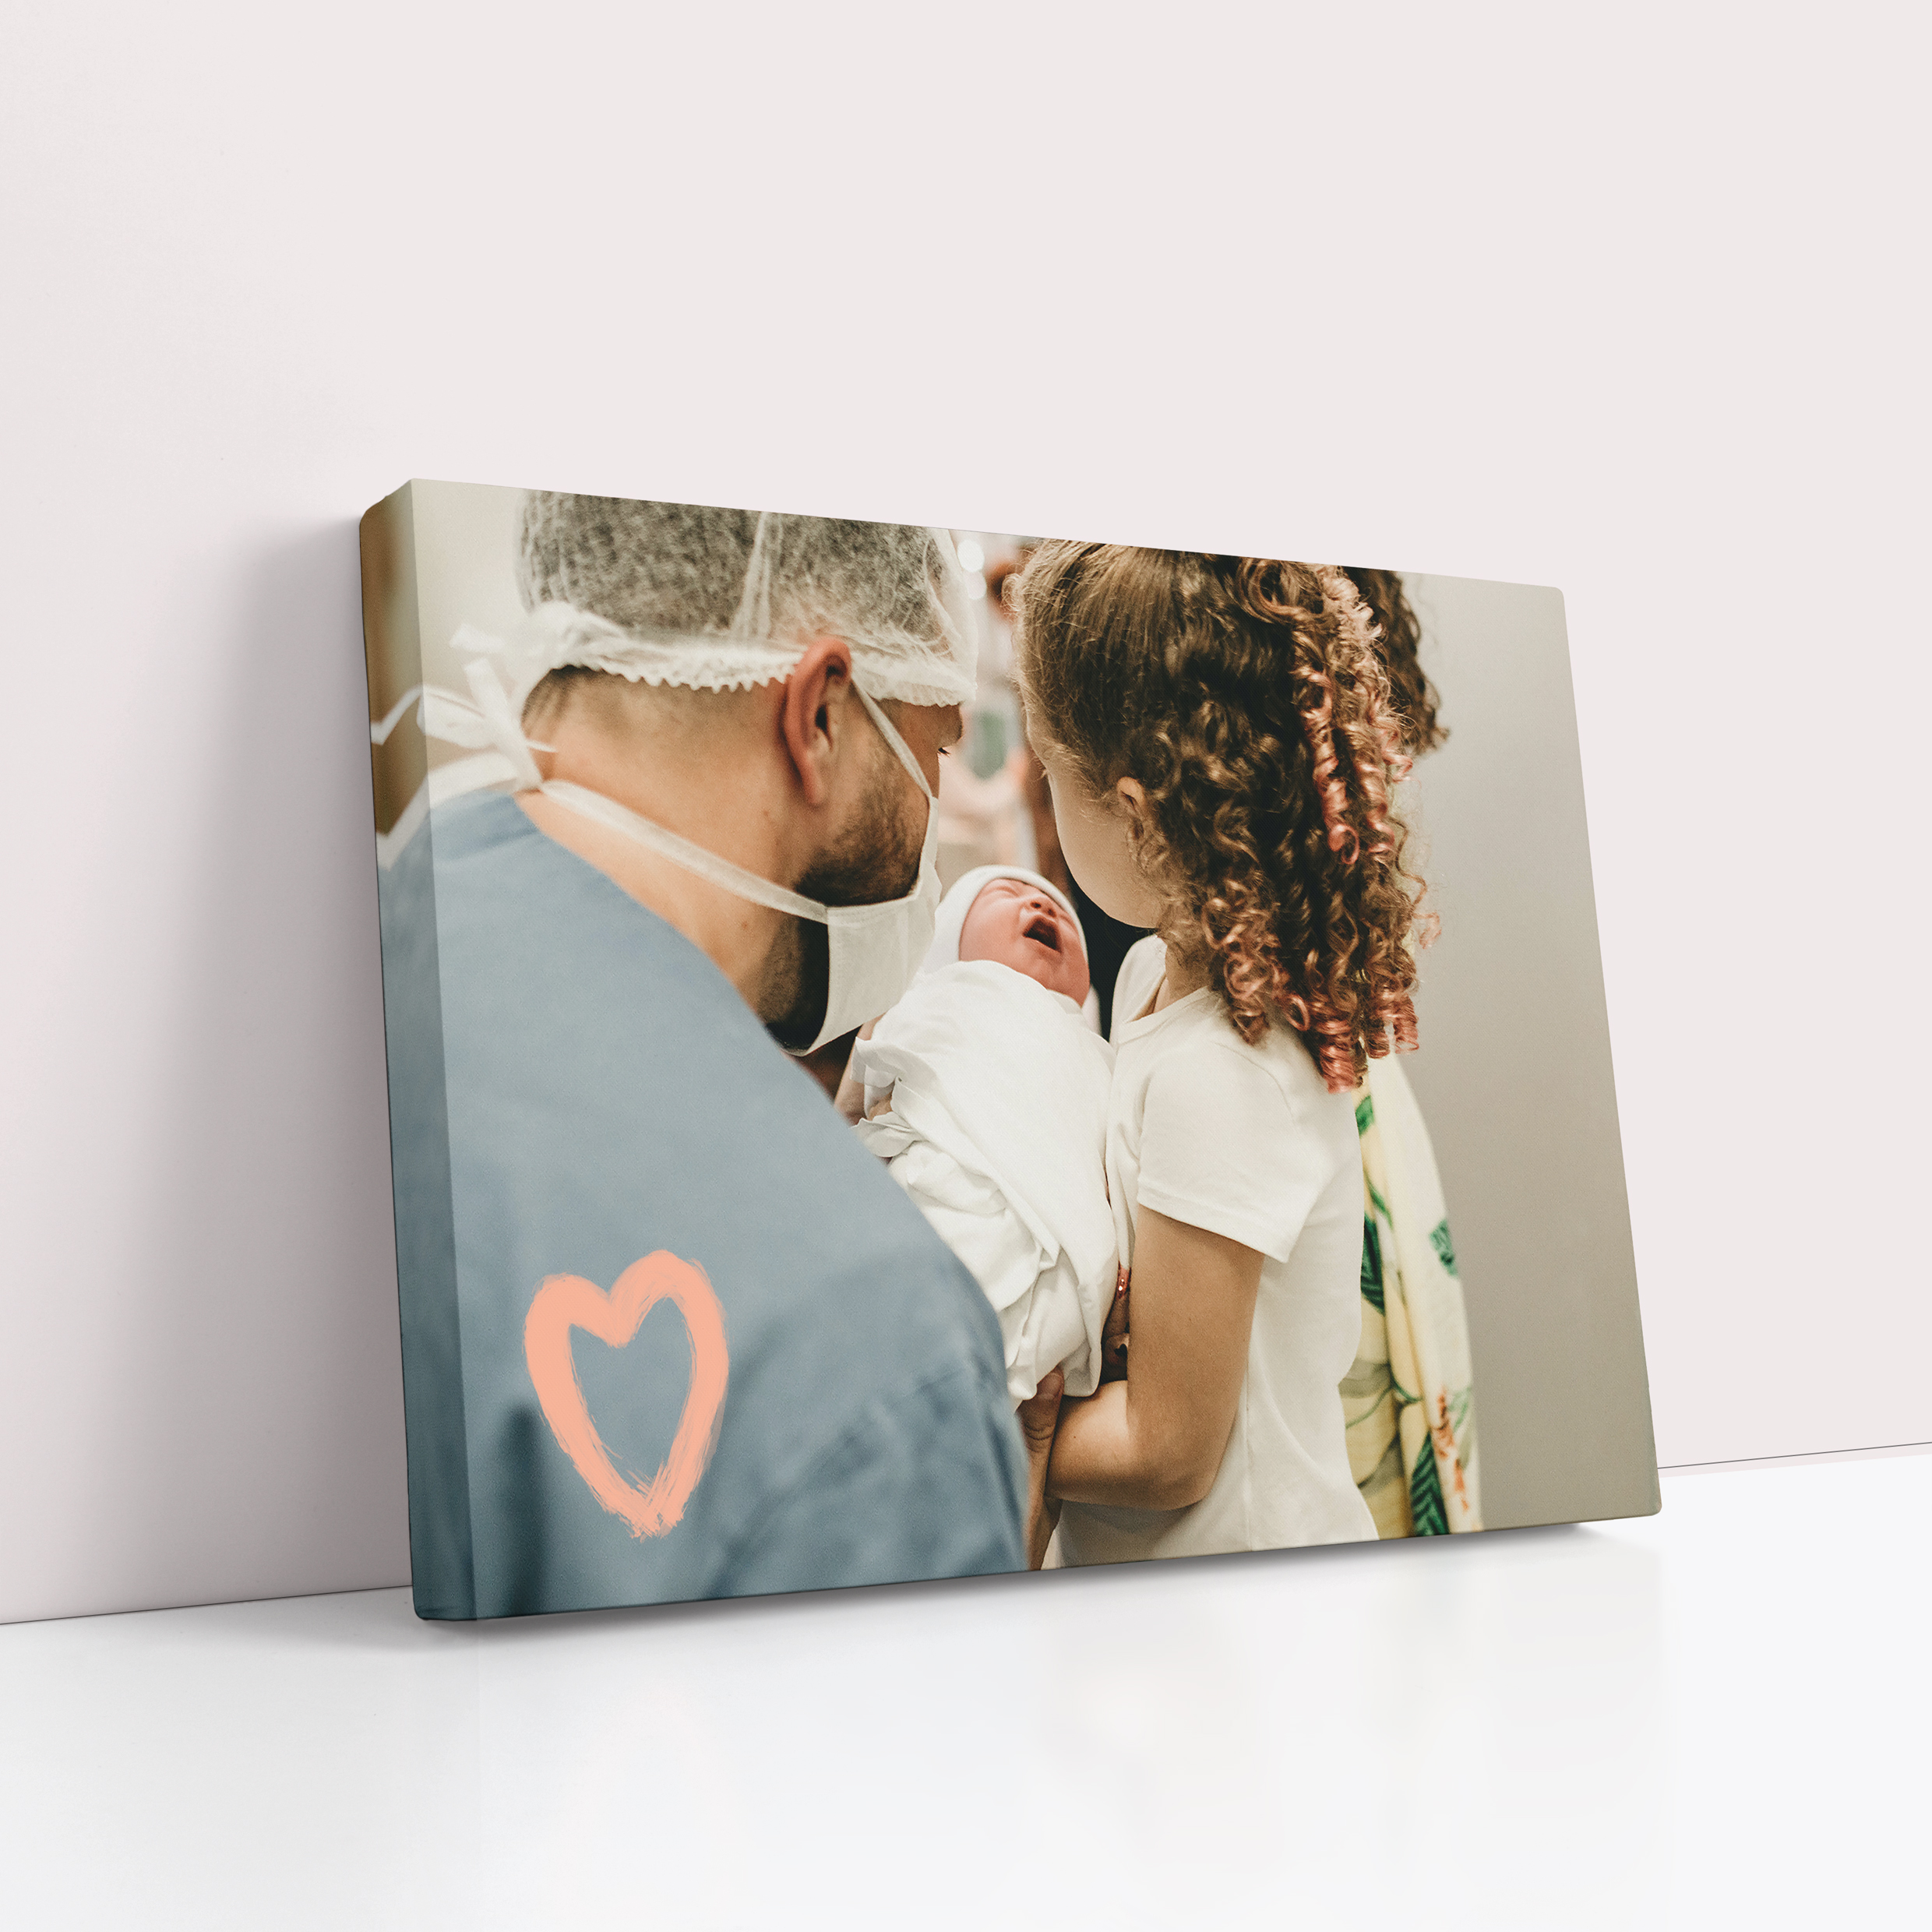  Personalized Heart in the Corner Photo Canvas Print - Transform Your Space with Cherished Moments